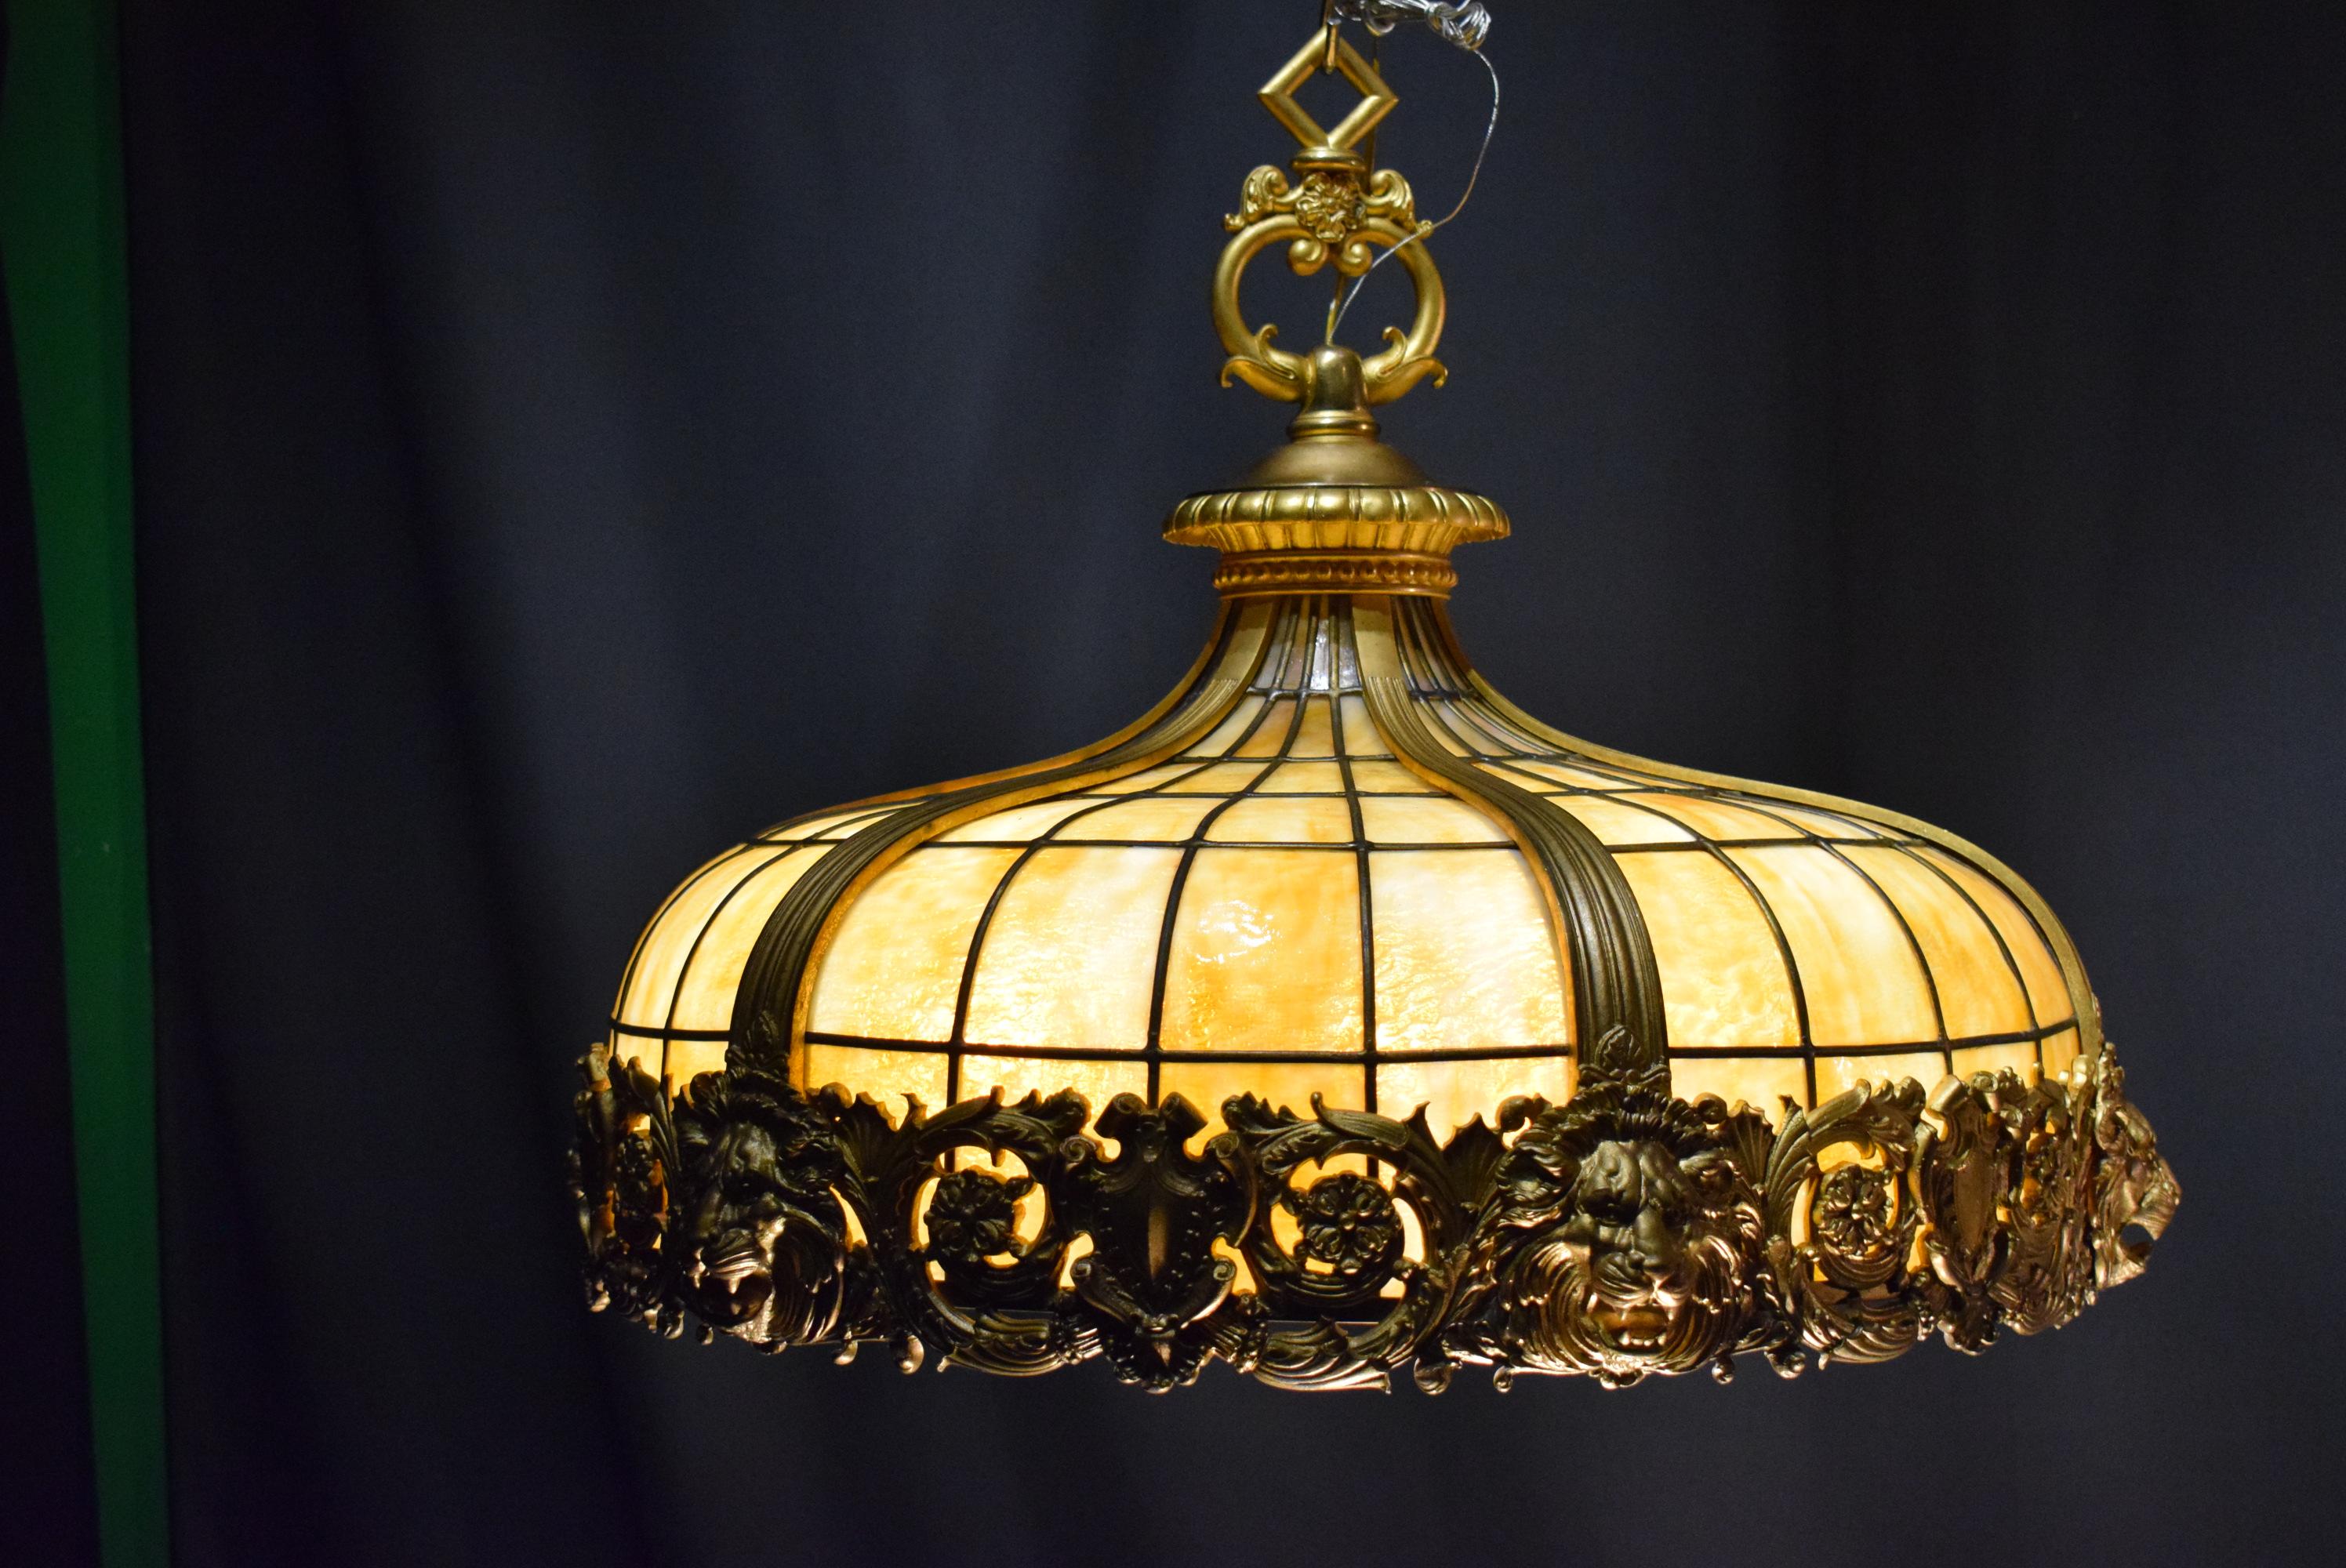 Very fine gilt bronze and slag glass hanging lamp attributed to Duffner and Kimberly. This firm made these types of lamps for a very short period in the early 1900s. Eight internal lights. Duffner and Kimberly was a New York City company which